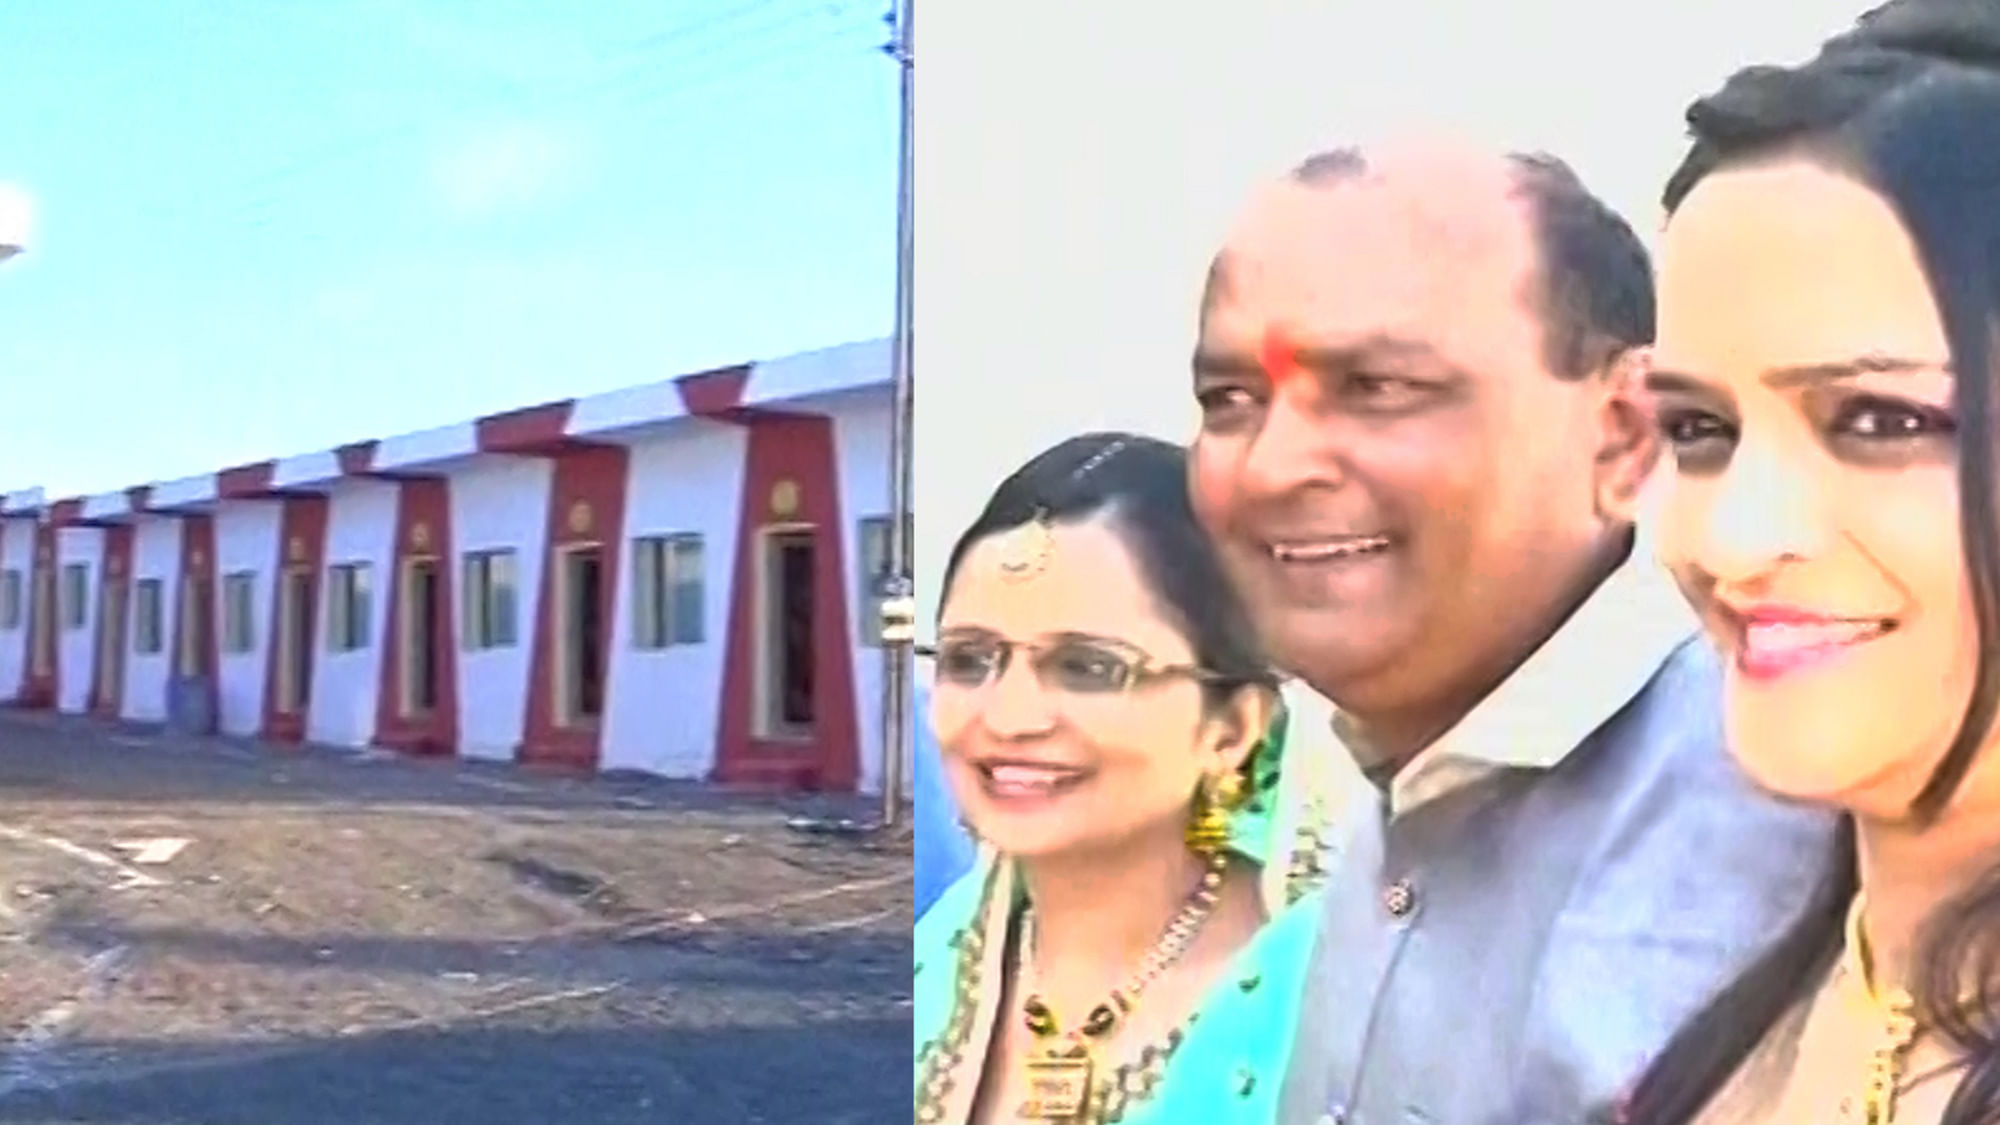 Around 40 families have moved into the 90-odd houses gifted by Manoj Munot on his daughter Shreya’s wedding. (Photo: ANI Screengarb)